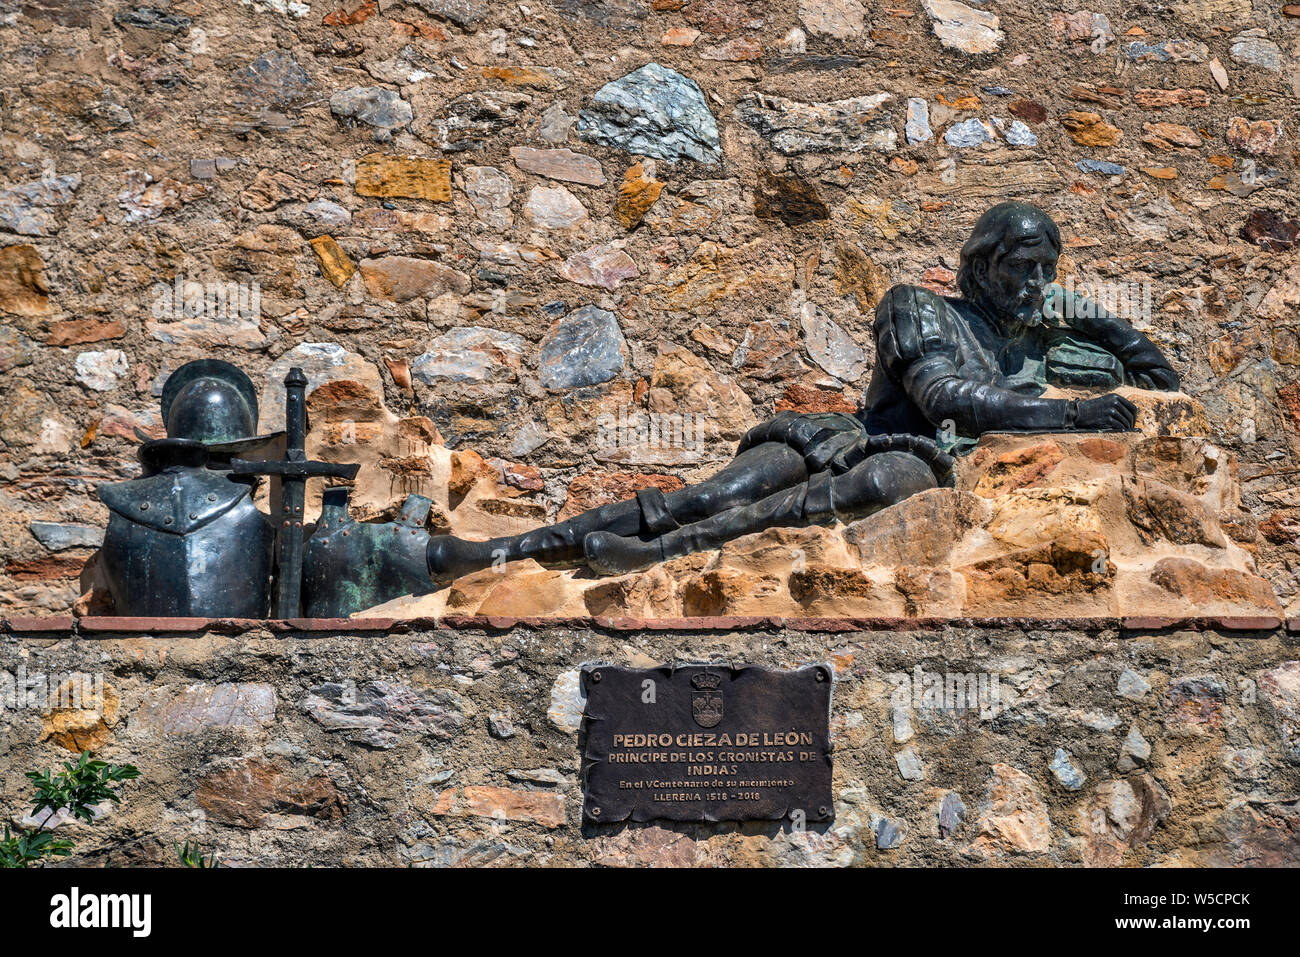 Sculpture of Pedro Cieza de Leon, 16th century conquistador and chronicler of Peru, at medieval wall in Llerena, Badajoz province, Extremadura, Spain Stock Photo